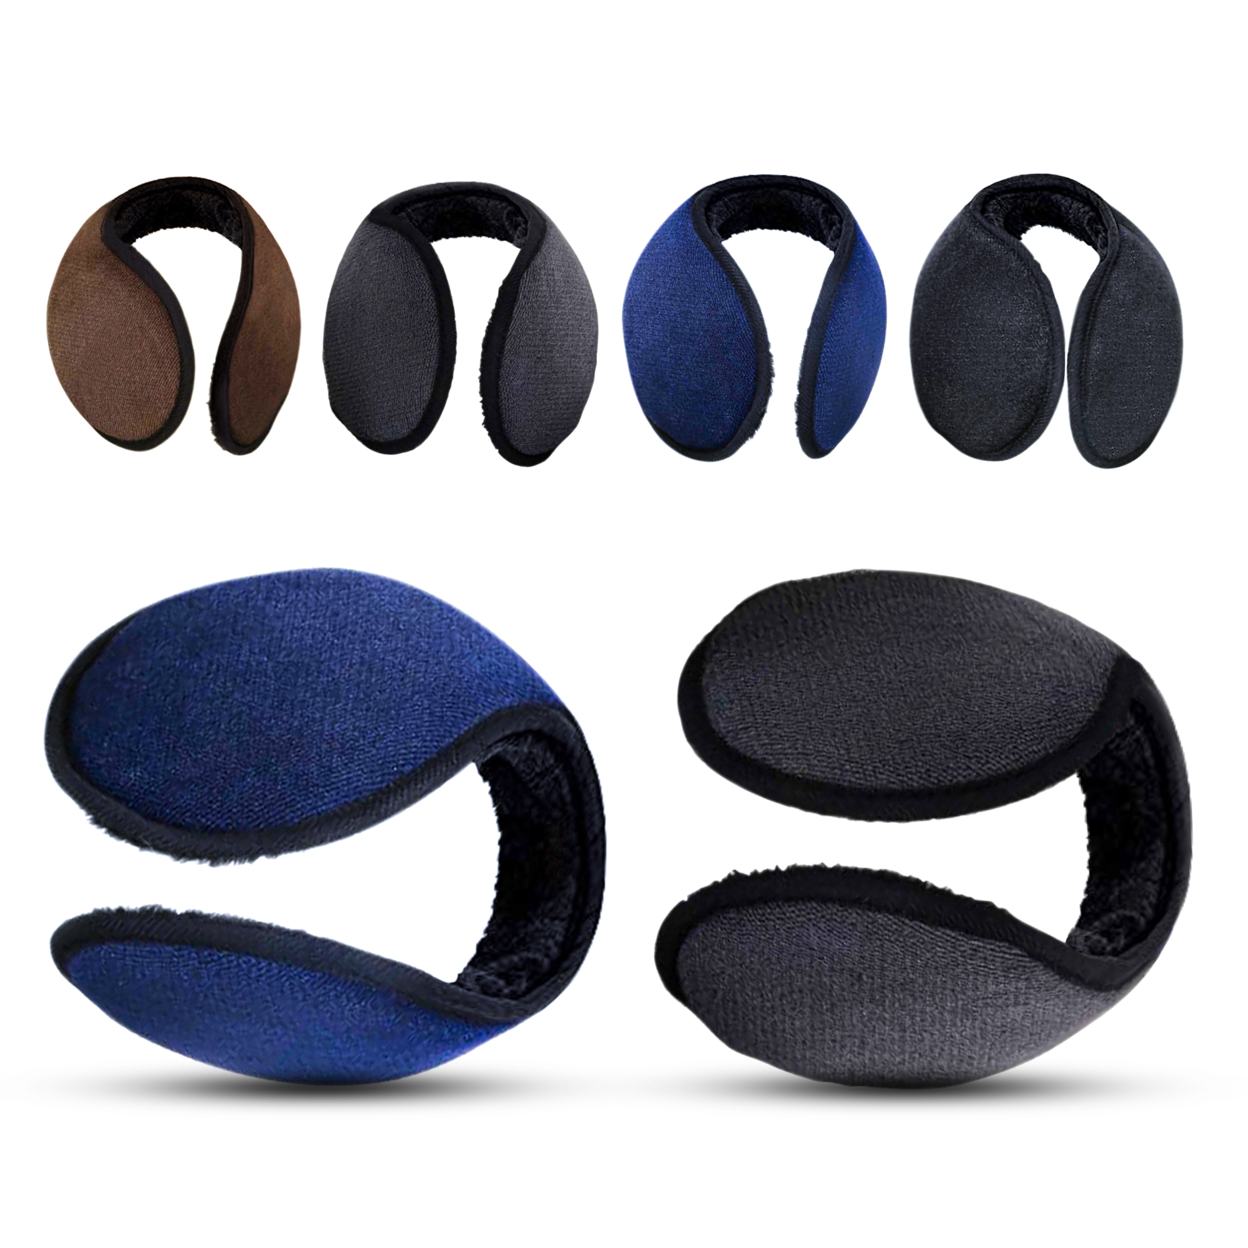 4 Pack: Unisex Ultra-Plush Fur Lined Winter Windproof Plush Behind Head Earmuffs - Assorted Colors